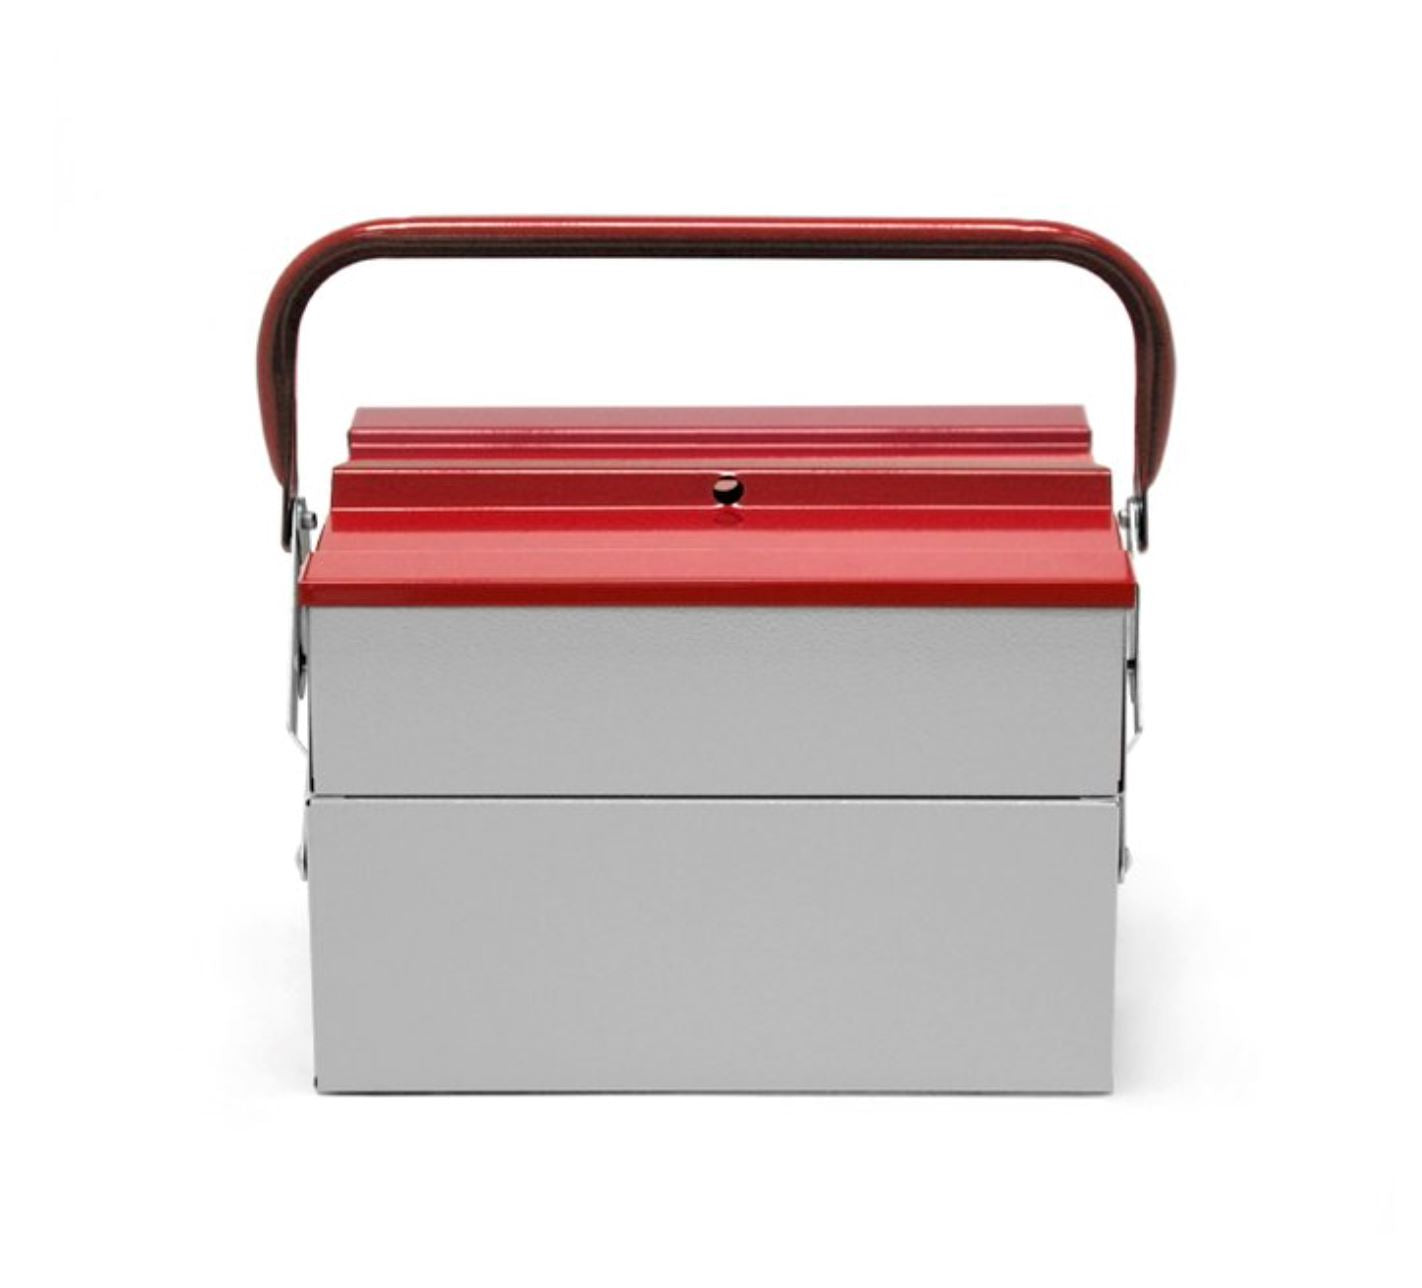 Compact Tool Box - Light Grey / Red Top - Third Drawer Down